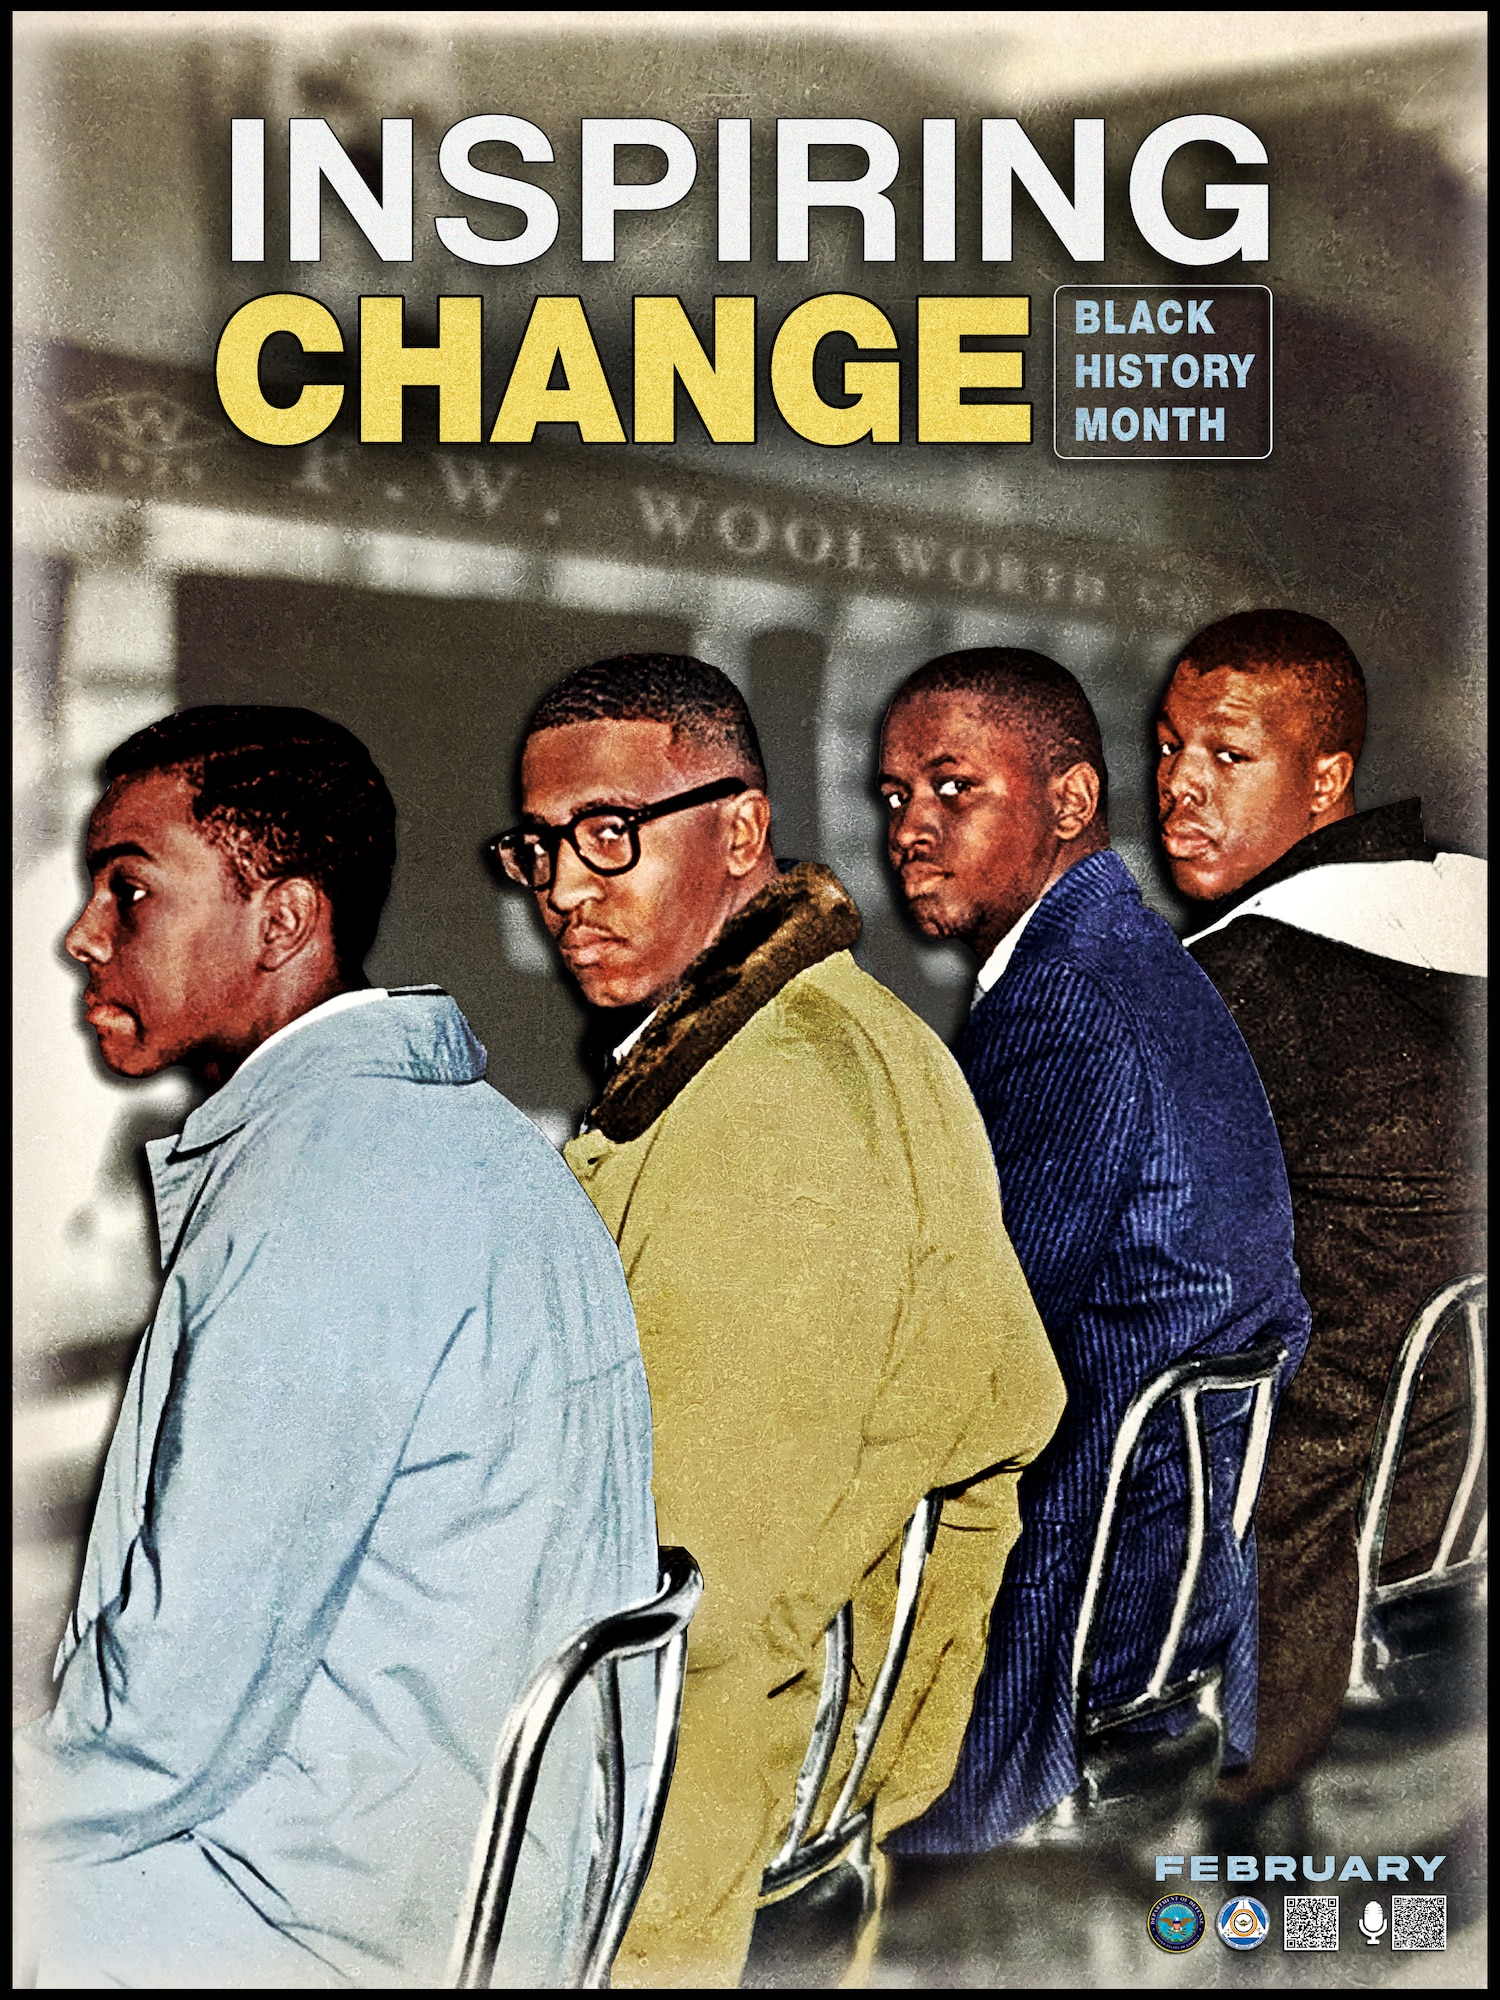 “The 2023 Department of Defense Black History Month poster depicts (from left) Joseph McNeil, Franklin McCain, Ezell A. Blair, Jr., and David Richmond, on the second day of a peaceful sit-down protest they organized at a Woolworth in Greensboro, North Carolina.